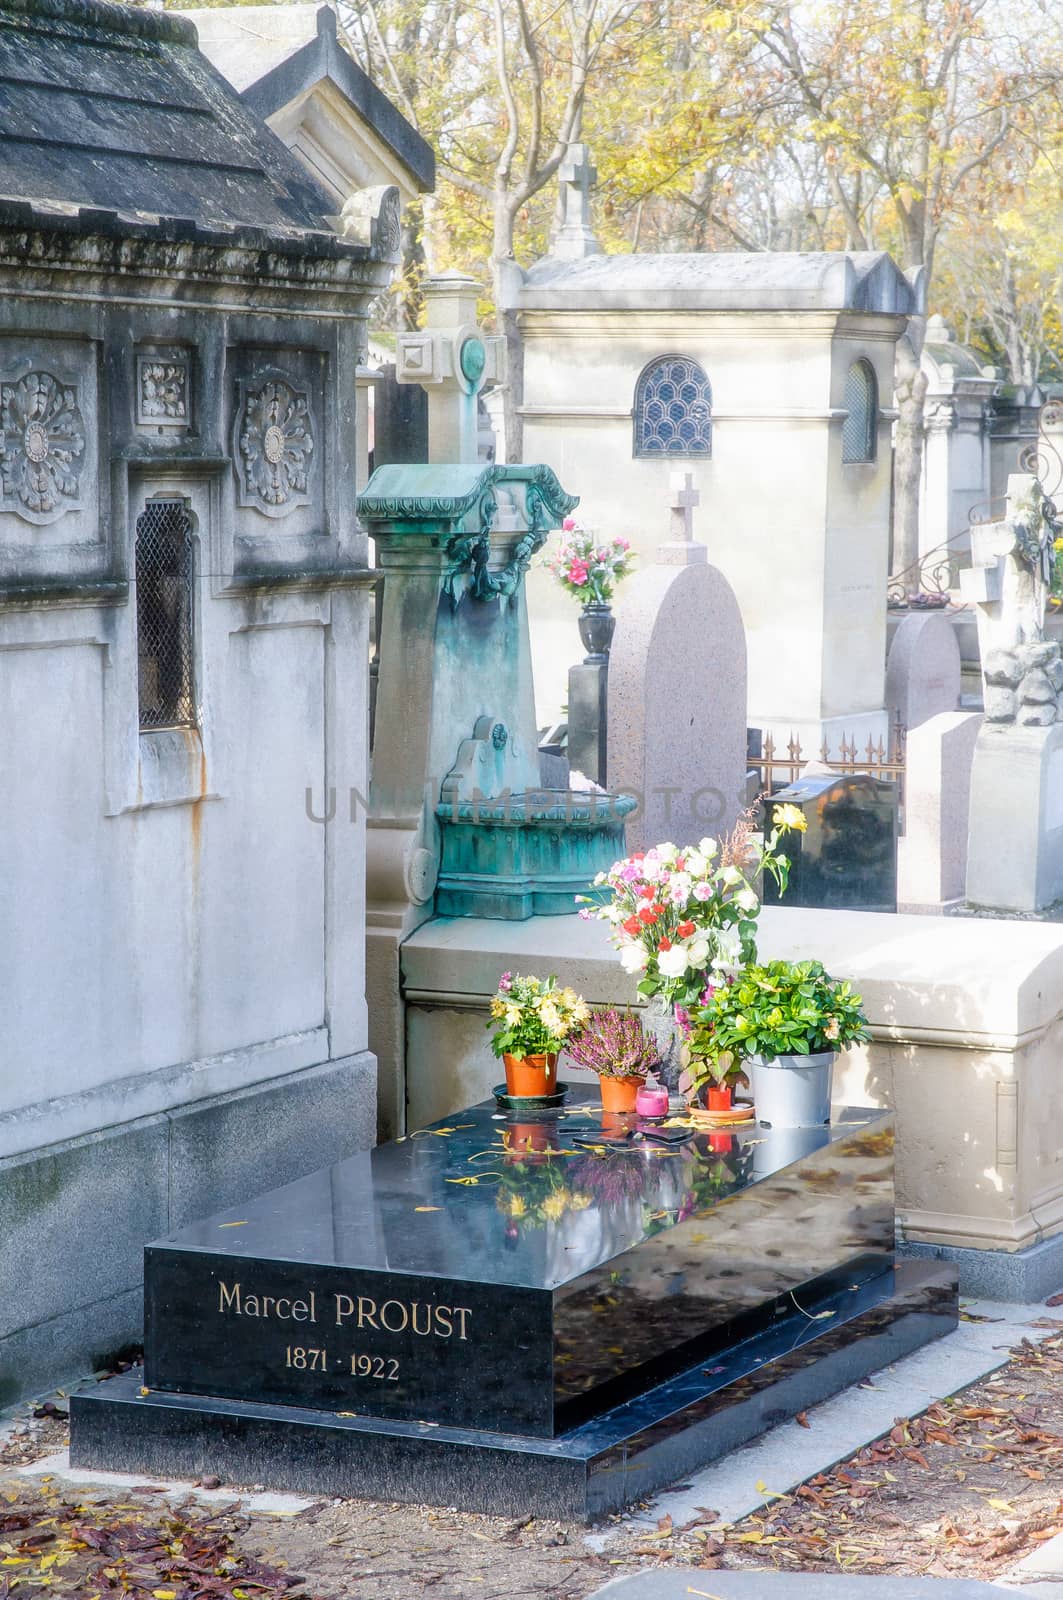 Marcel Proust Tomb in the Pere Lachaise cemetery in Paris, France